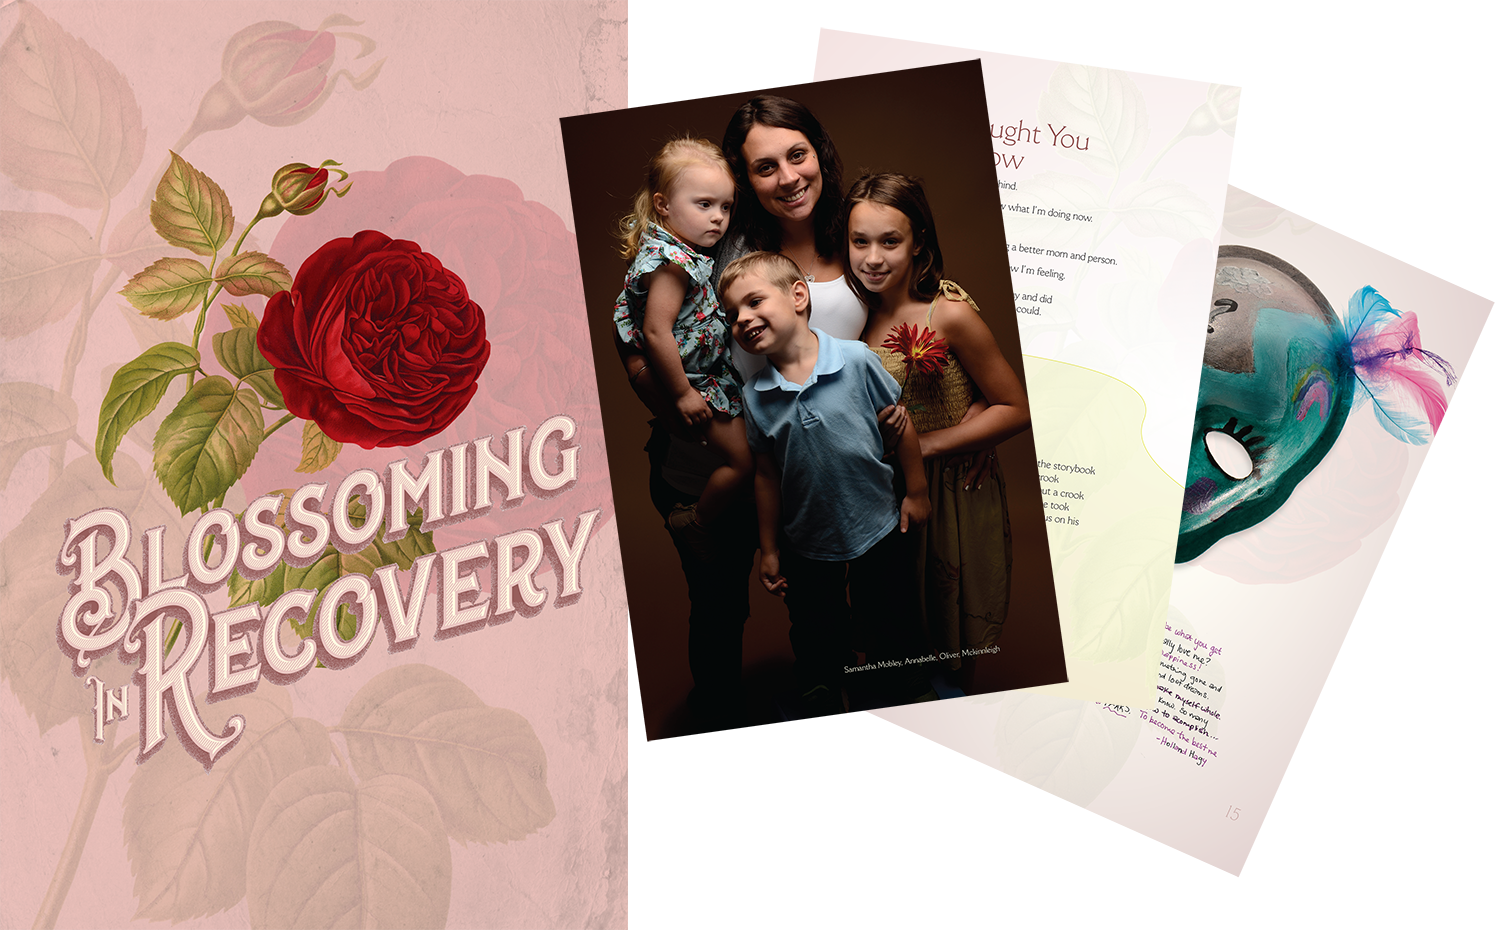 The Applied Theatre Center partnered with Serenity Place in 2020 to produce "Blossoming In Recovery", which featured writing and art by Serenity Place residents, as well as professional studio photographs of the writers and artists.